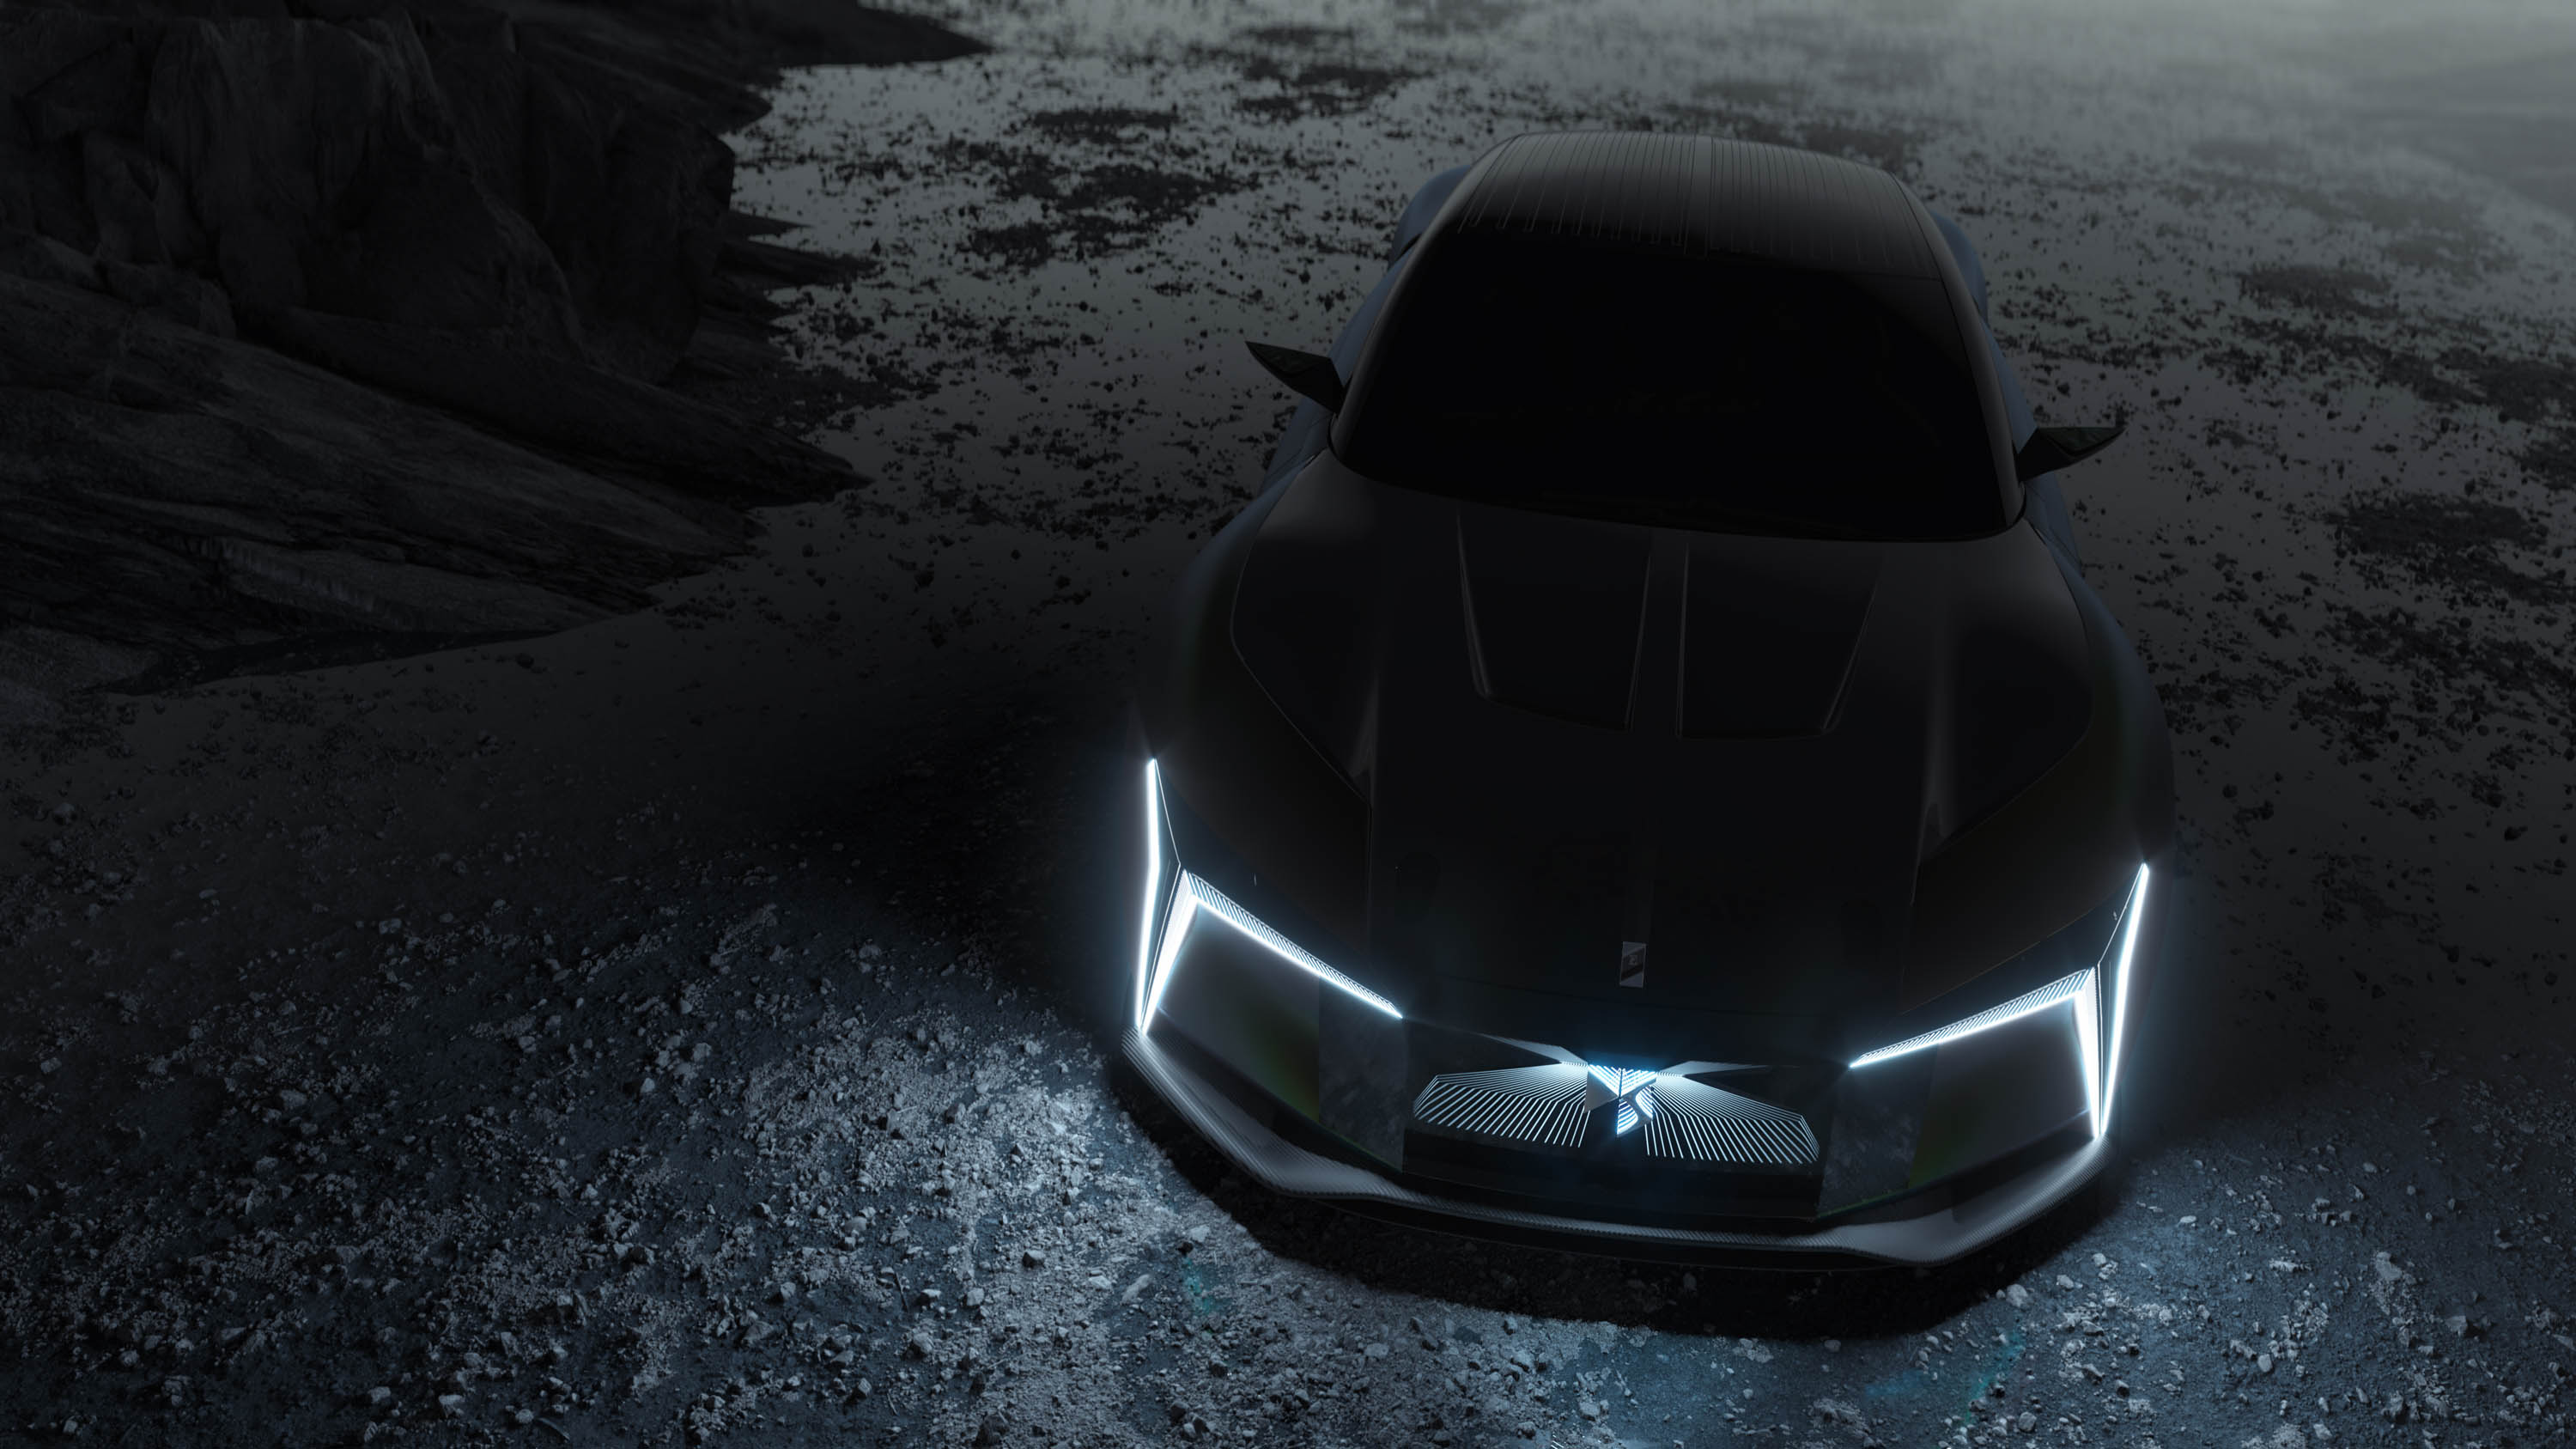 DS E Tense Performance Concept (2022) Picture 8 Of 13